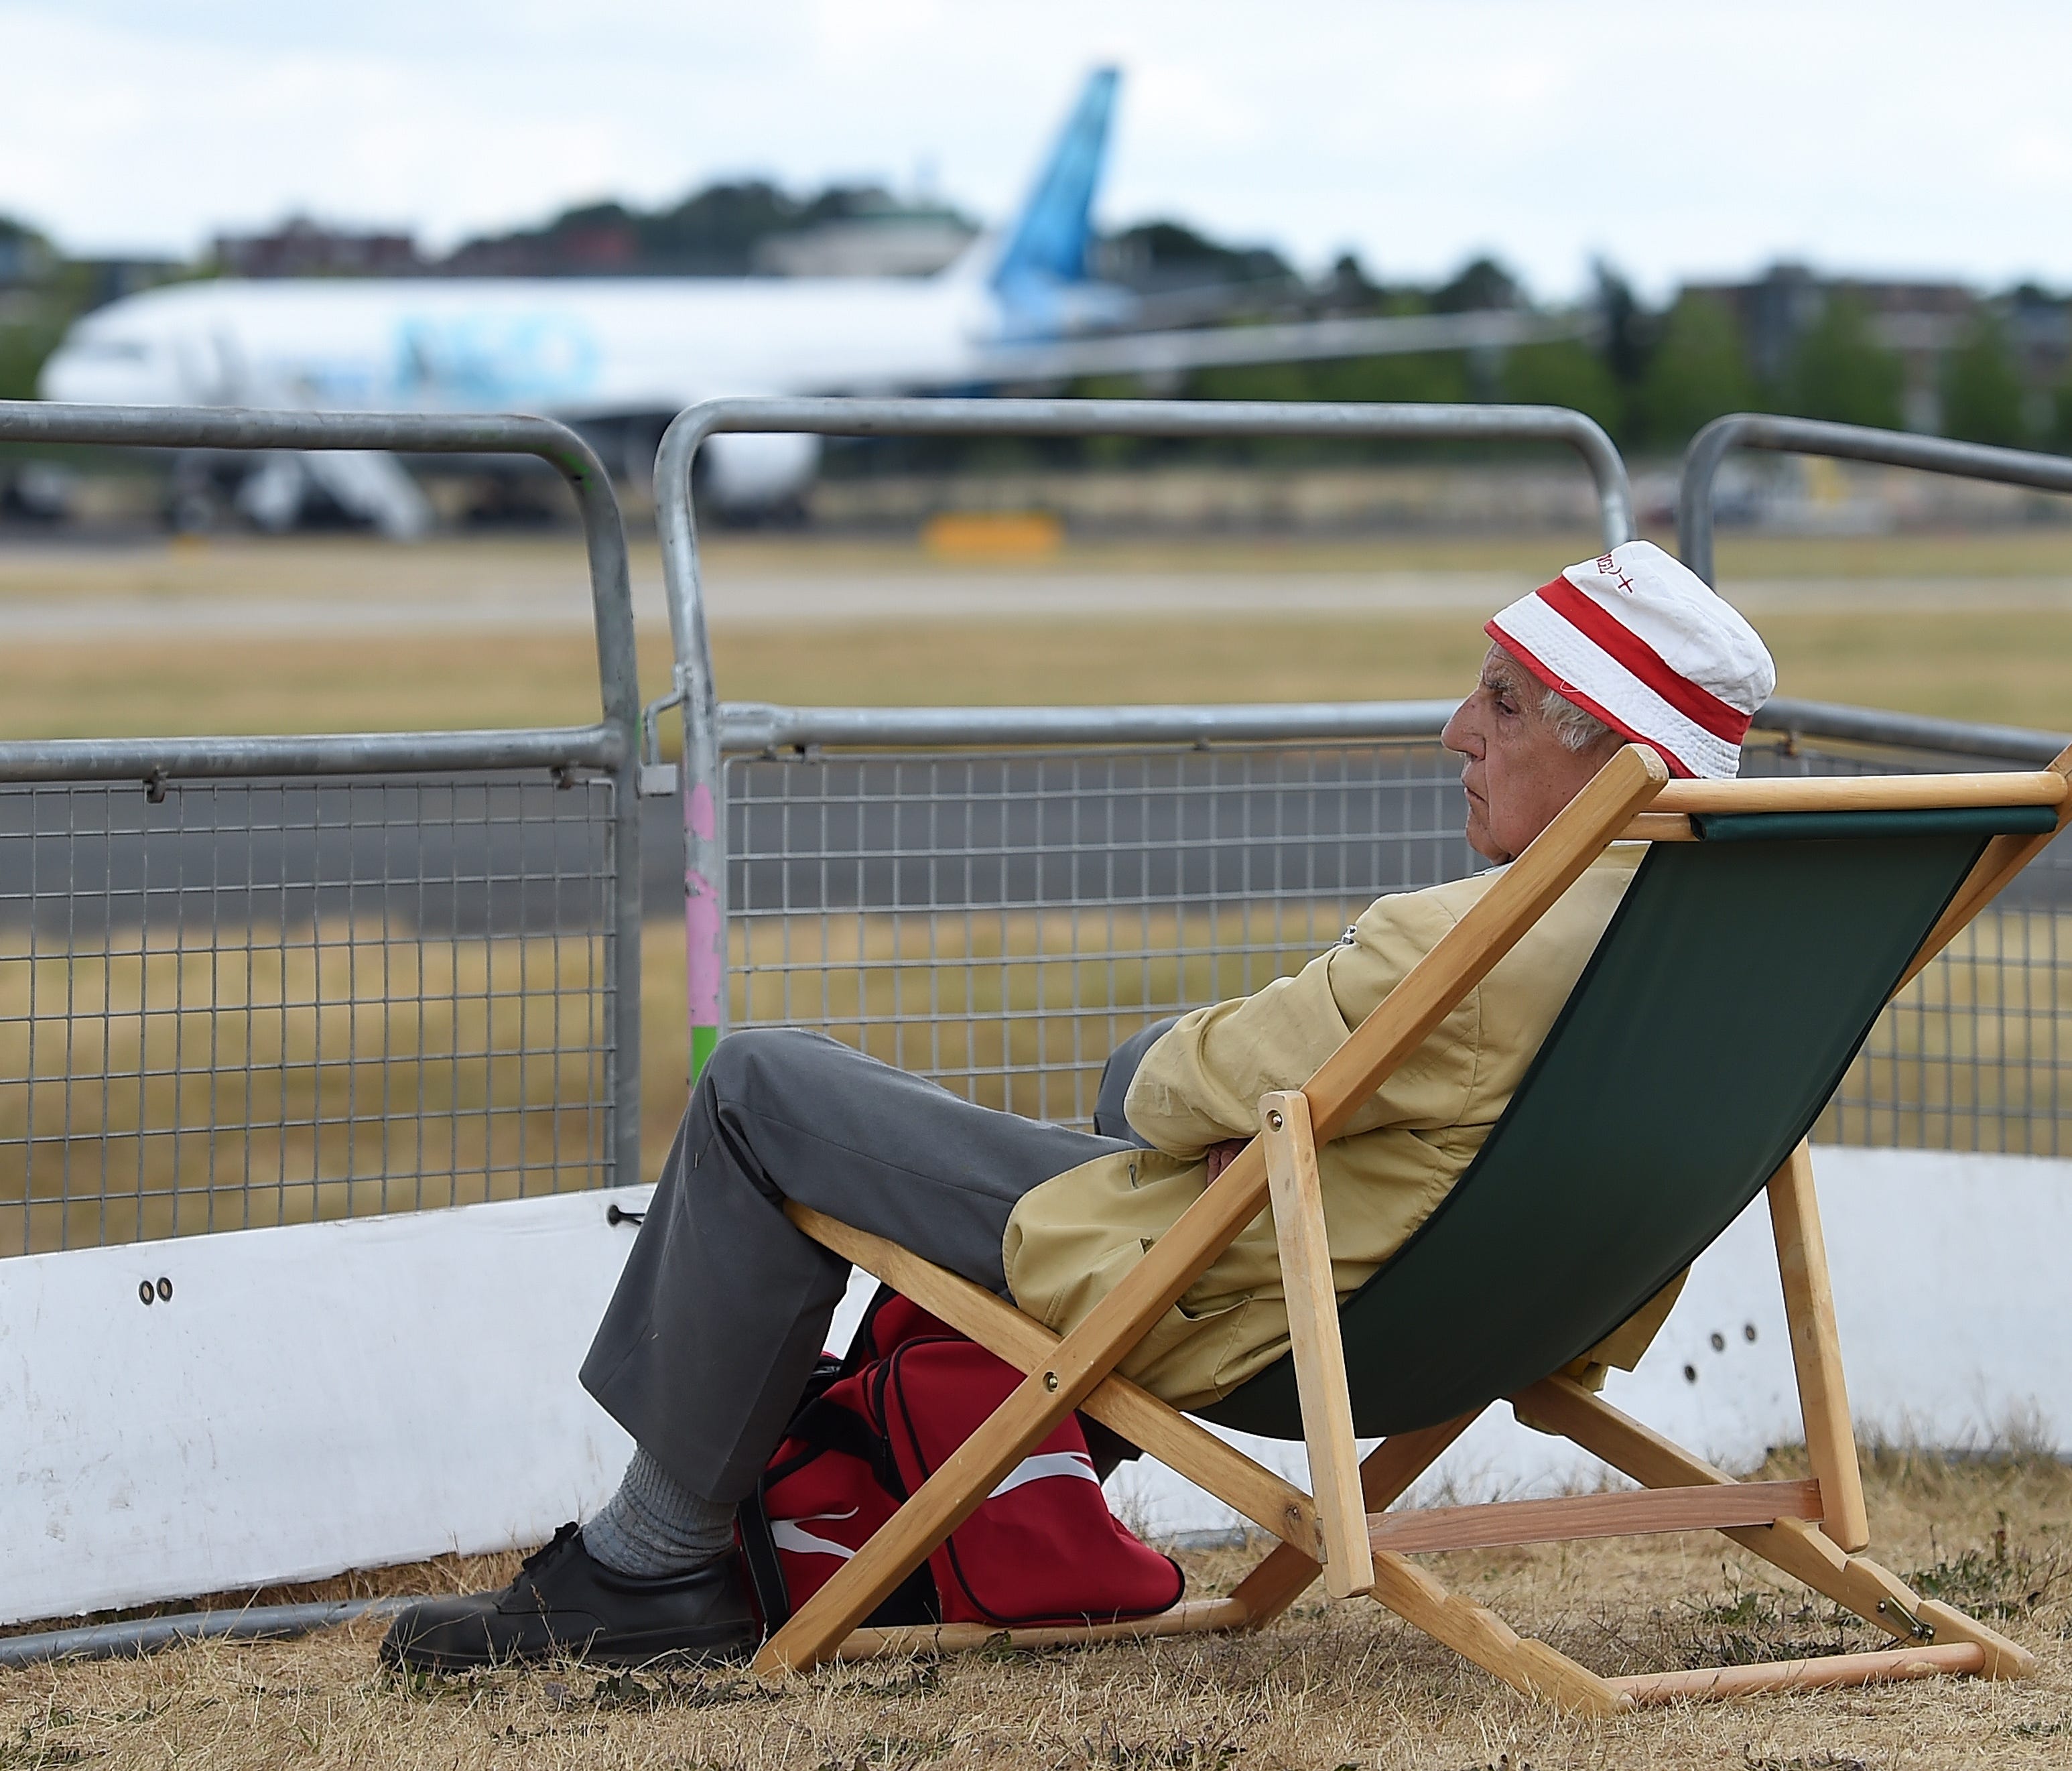 An aircraft enthusiast has a deck chair set up to watch the flight shows of various planes at the Farnborough International Airshow on July 17, 2018.